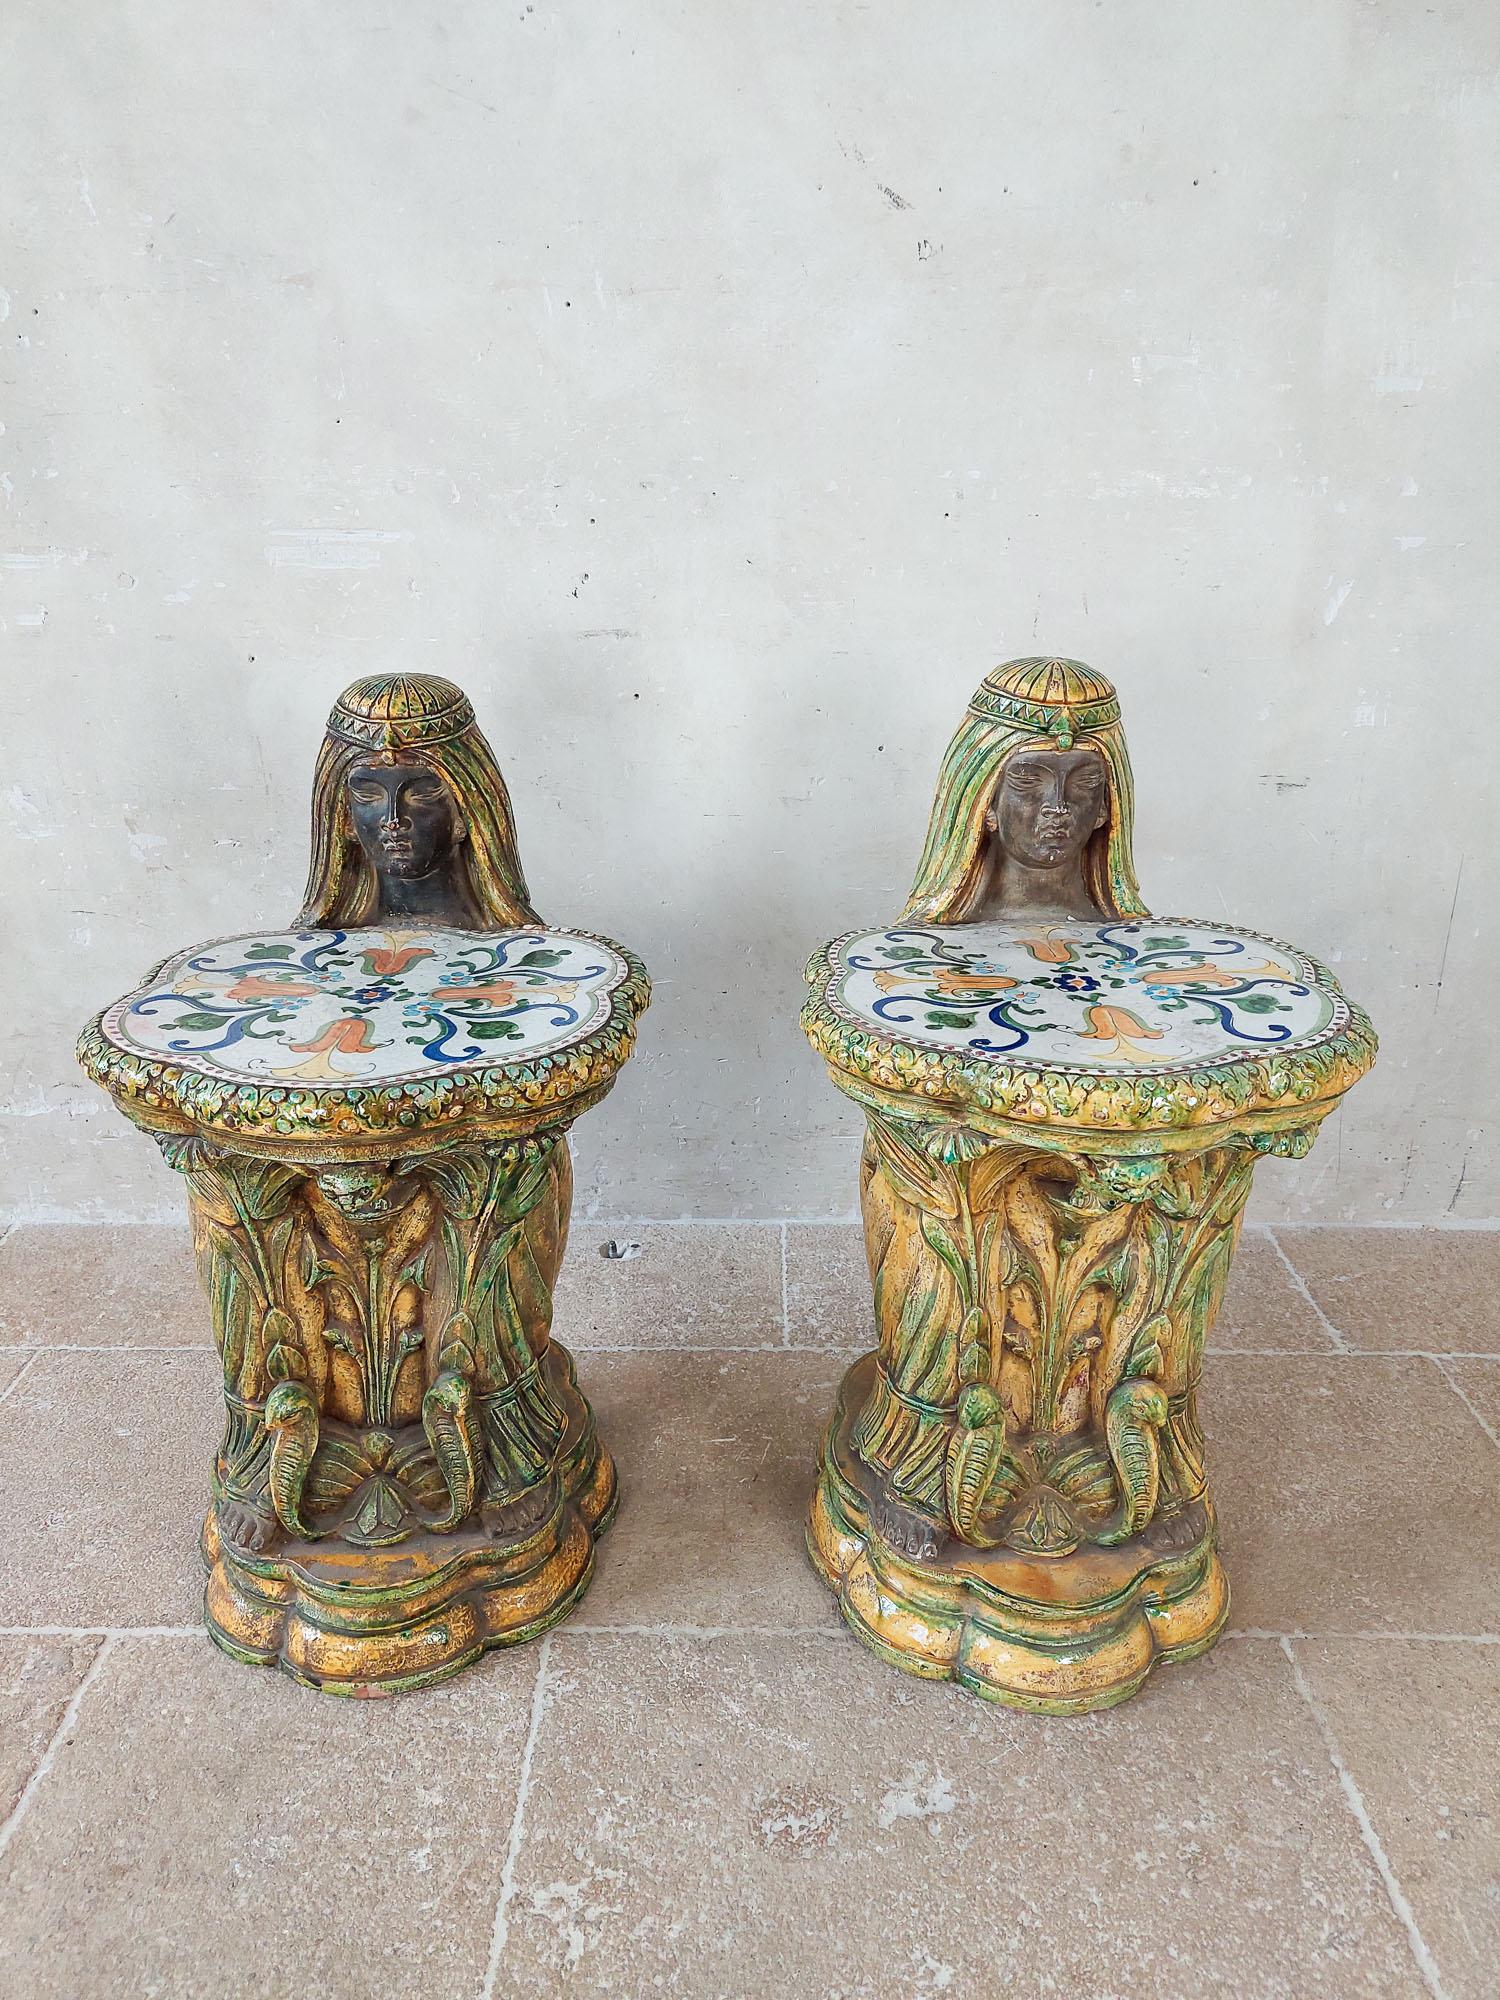 Pair of Midcentury Italian Majolica porcelain garden seats, exquisitely crafted in the shape of an Egyptian woman. Made by Vietri Ceramics, these unique pieces serve not only as stylish garden seats but also as versatile side tables, perfect for